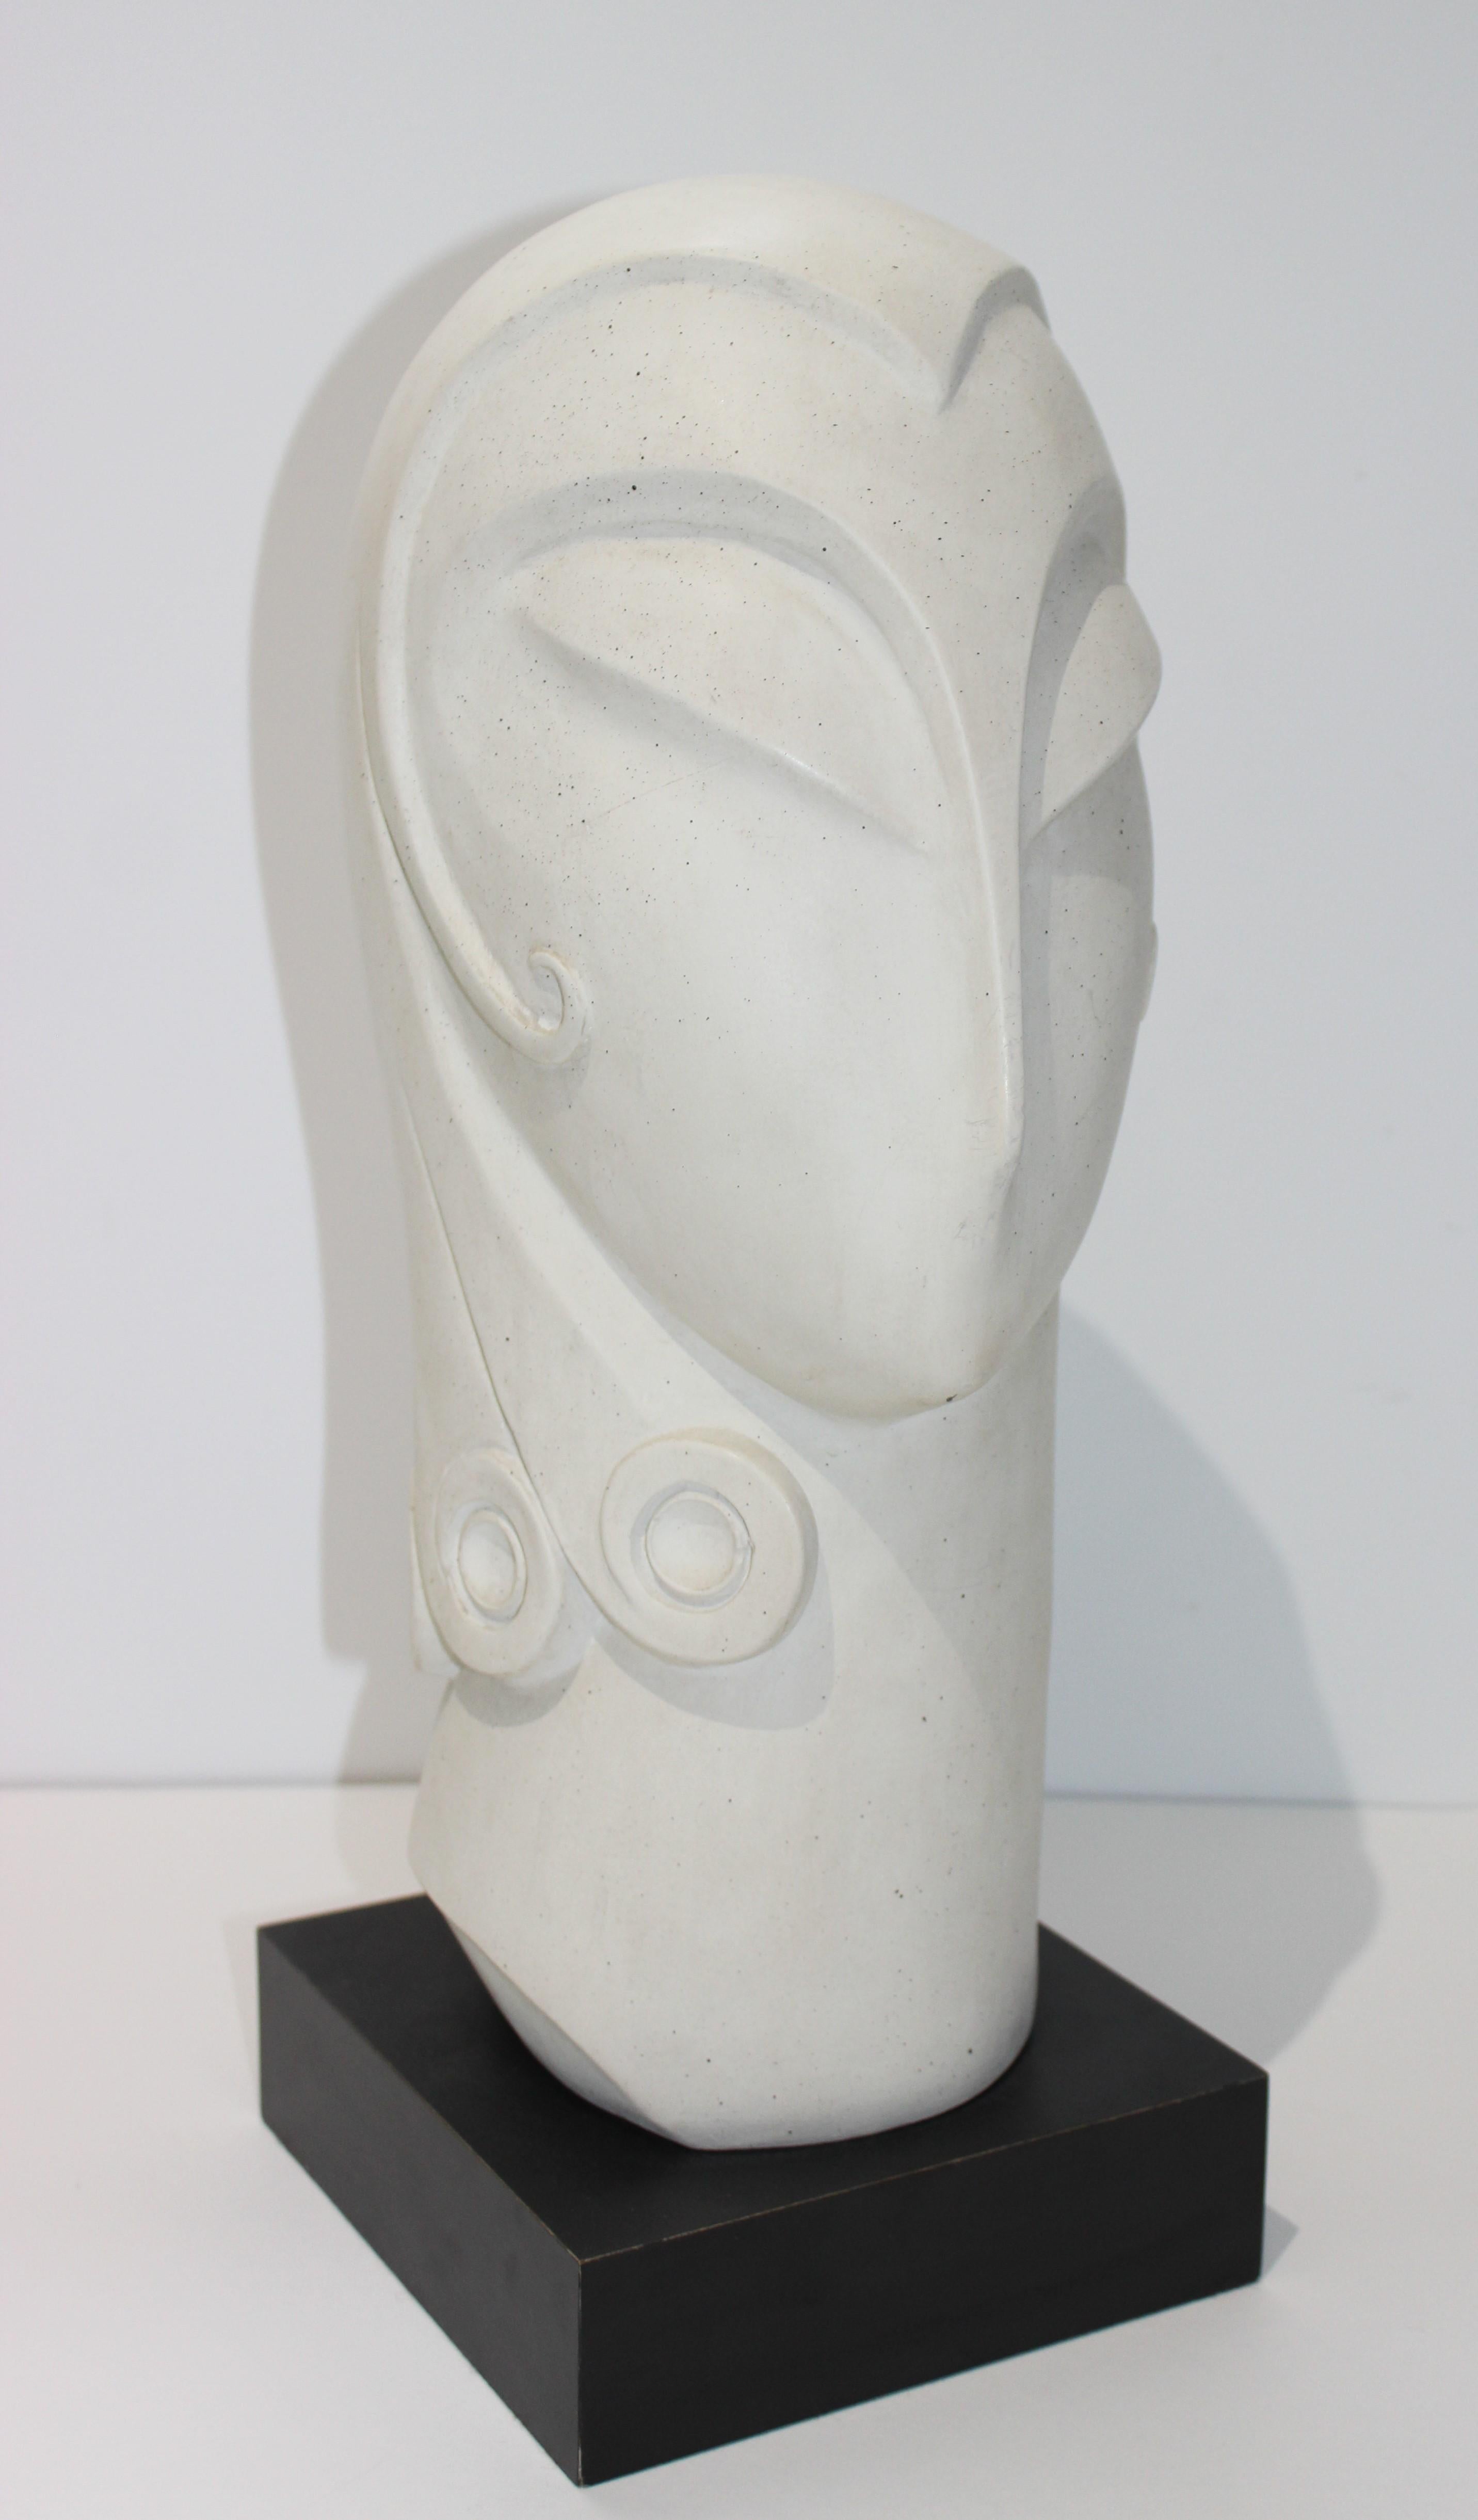 This large scale Austin Productions Art Deco style sculpture of a womans head showing off her stylish hairdo dates to 1985 and definitely has overtones of the exotic Asian influence of the 1920s and 1930s.

The sculptors name was Fisher, but we